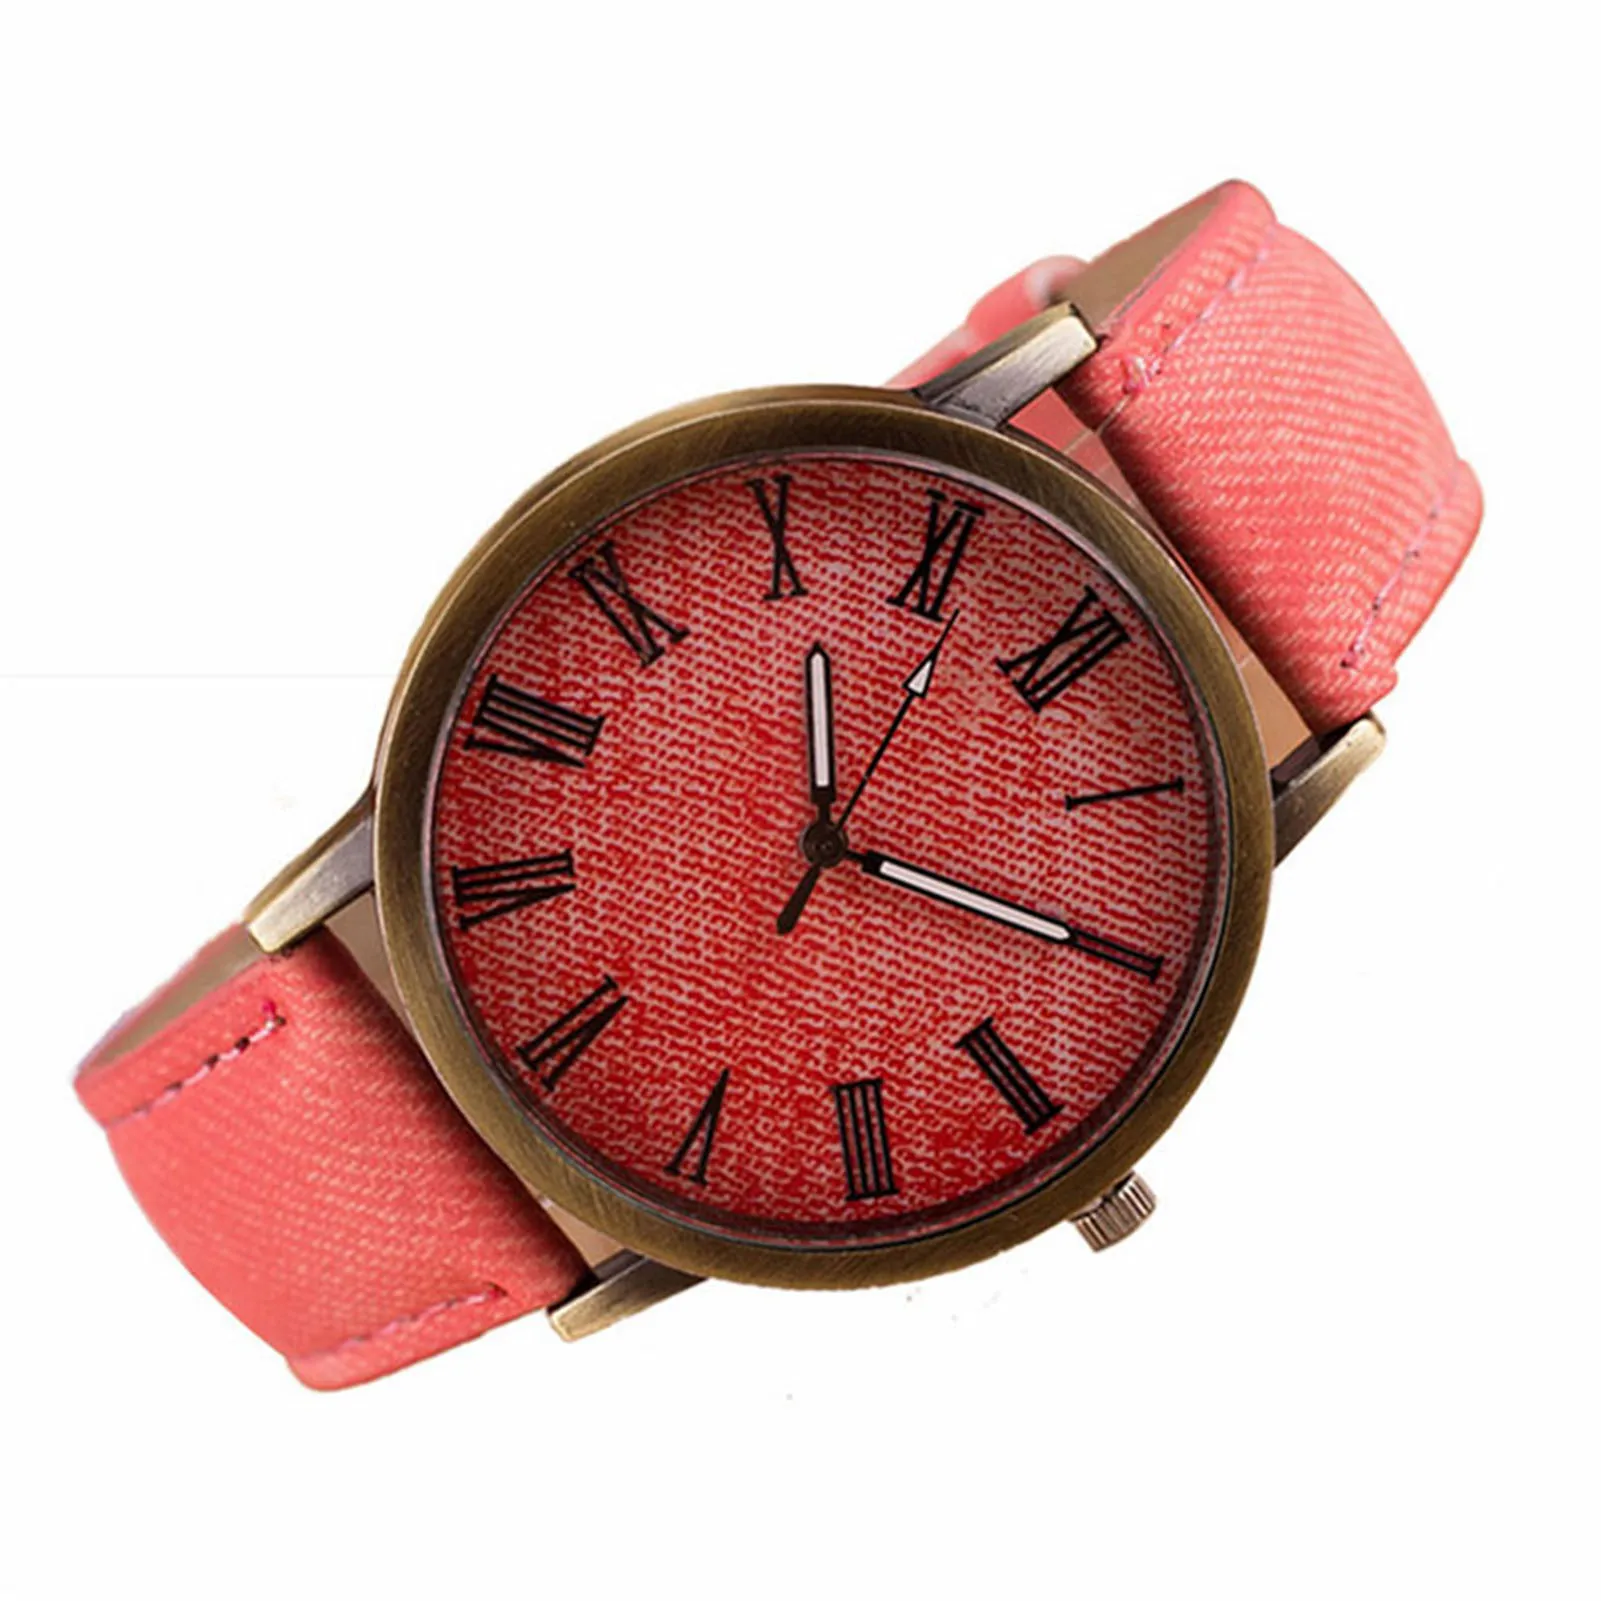 

Students and Young Girls Wrist Watch Stylish Watchband Wrist Watch for Shopping or Gathering with Friends